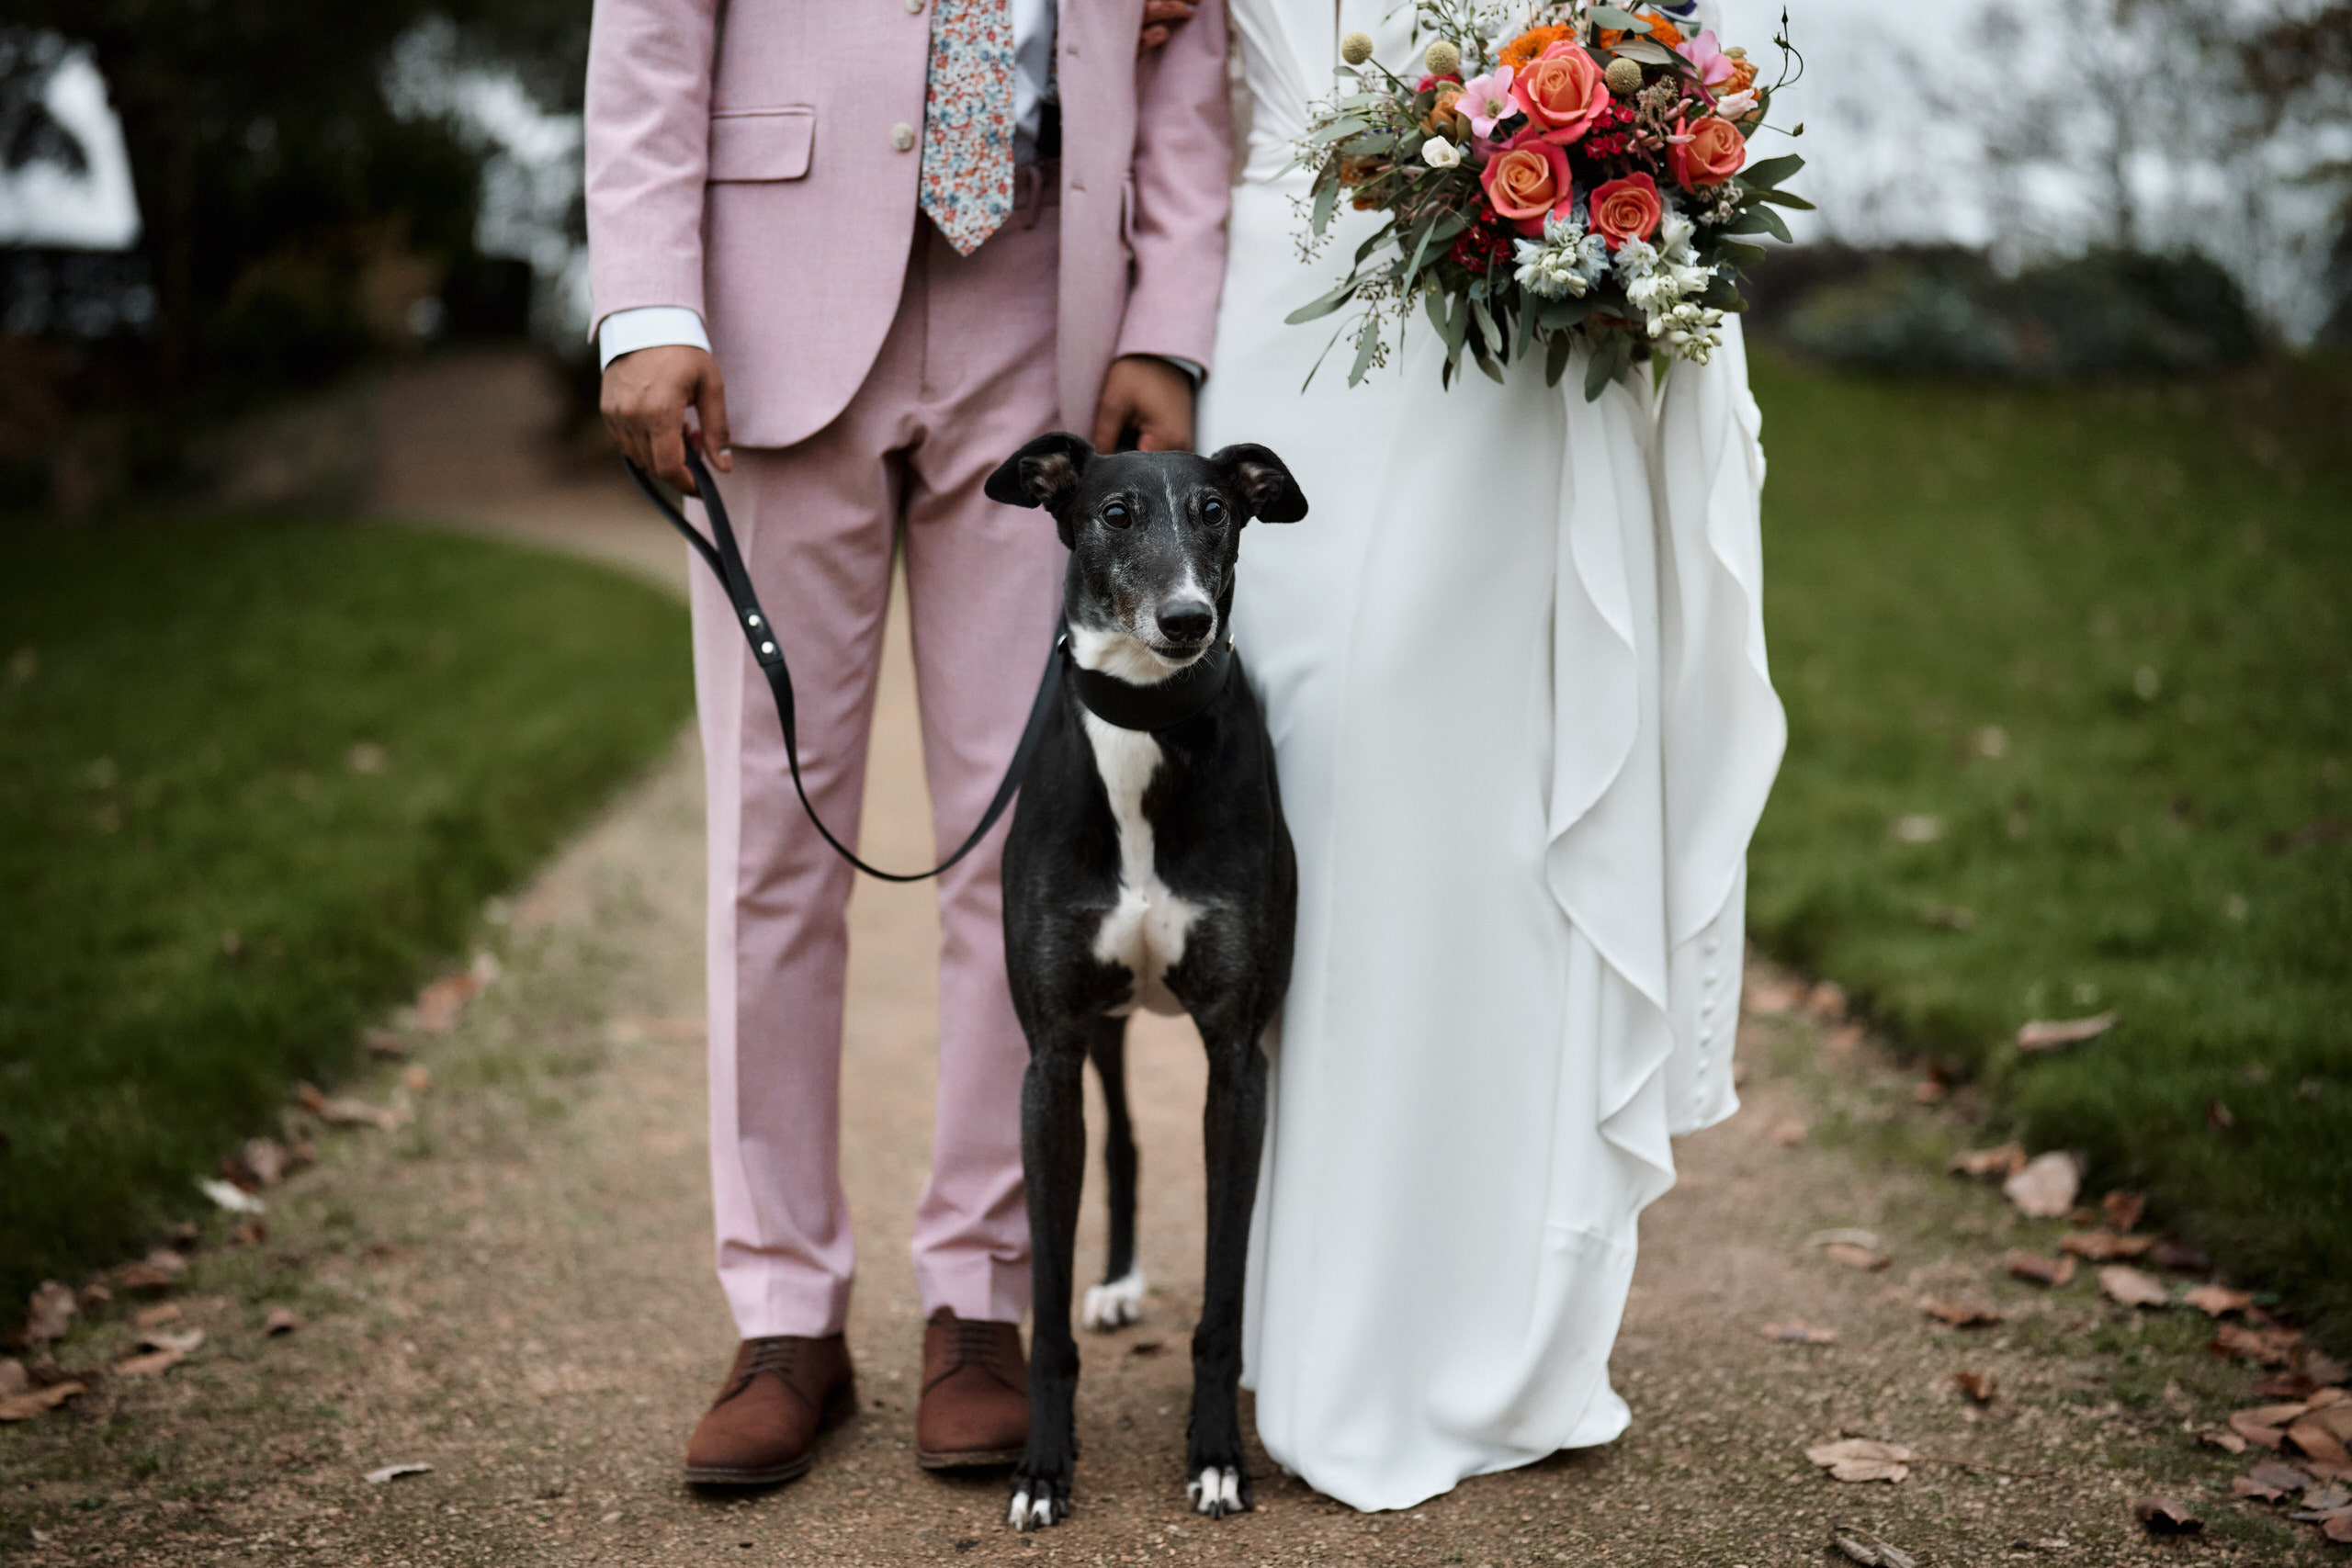 A couple getting married is standing next to a greyhound dog.